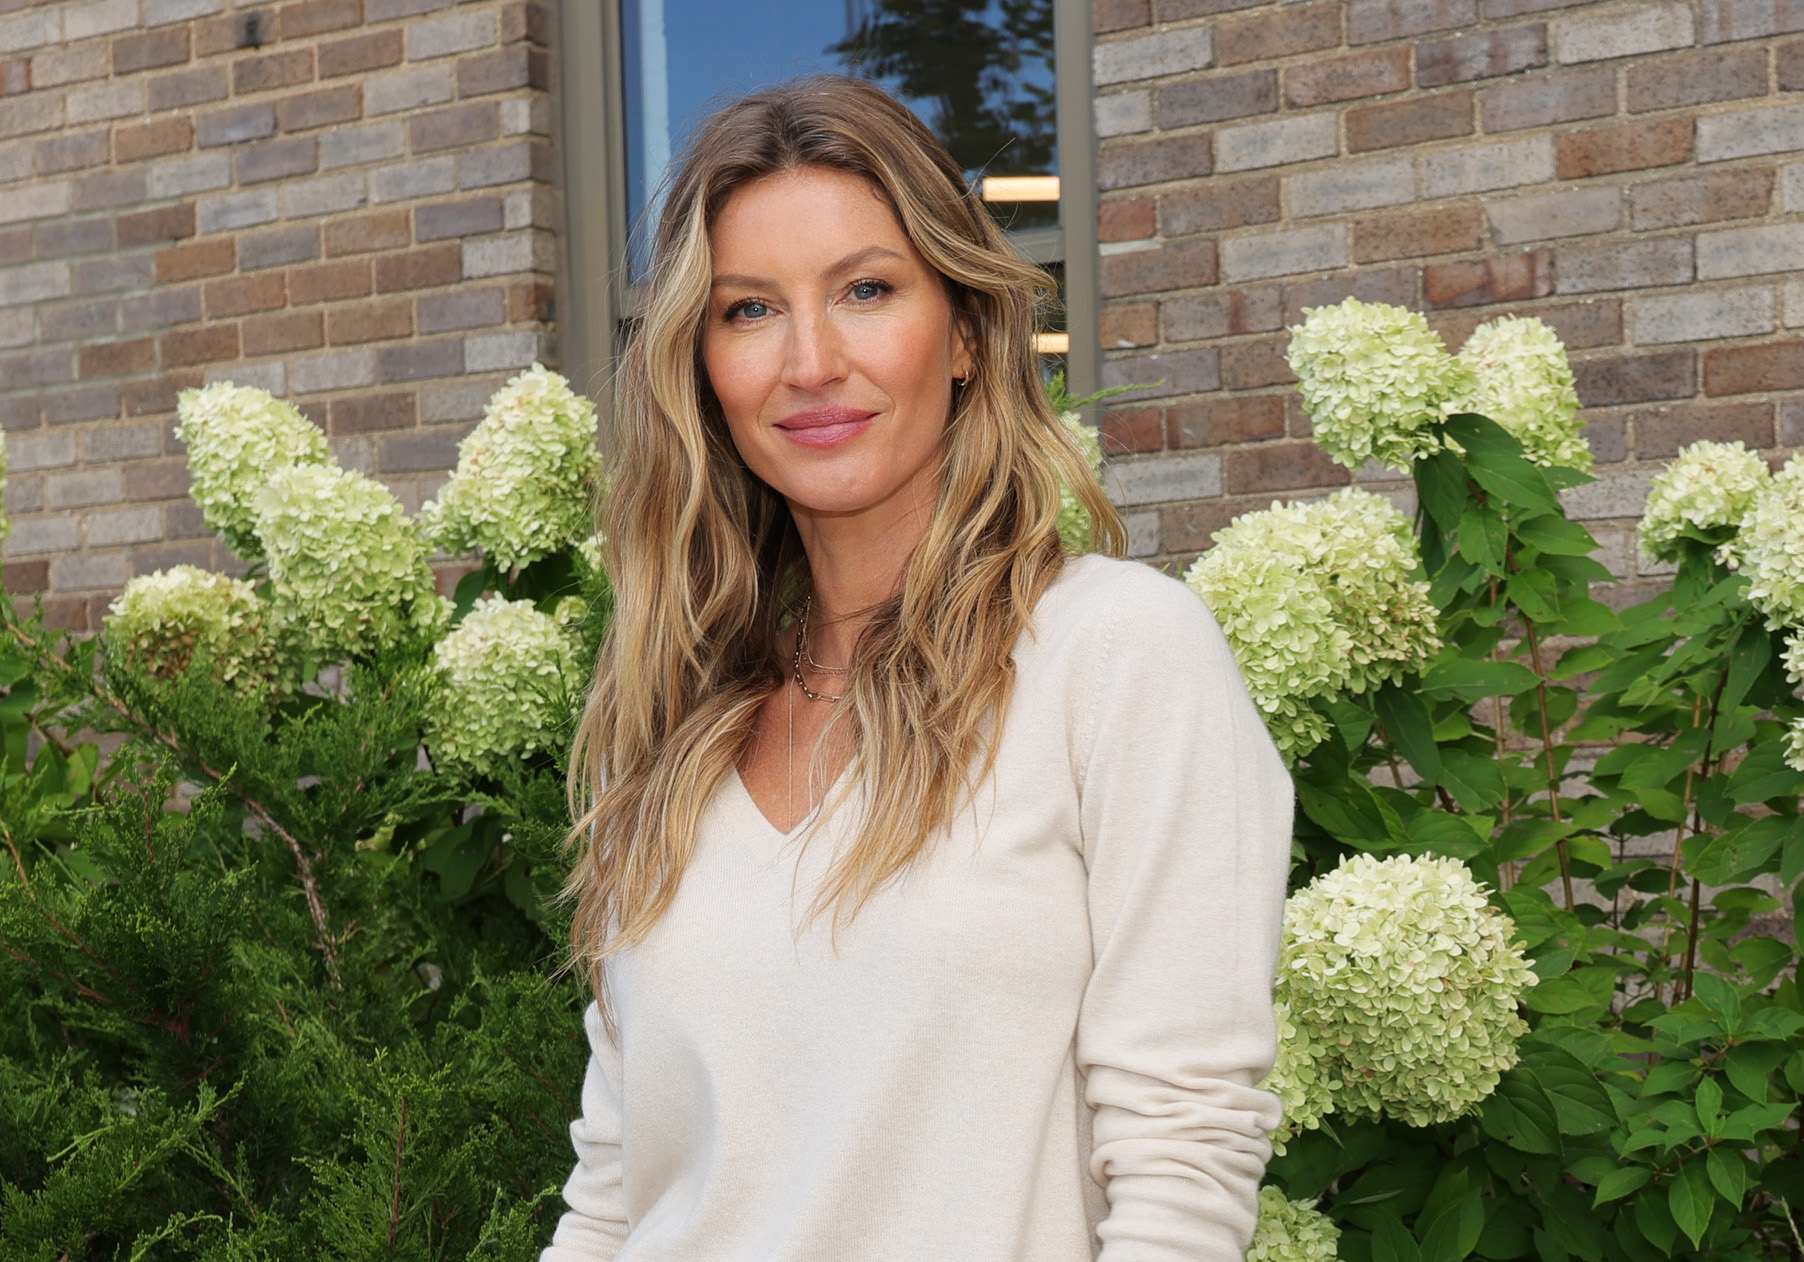 Gisele Bündchen opens up about challenging times post-divorce from Tom Brady.